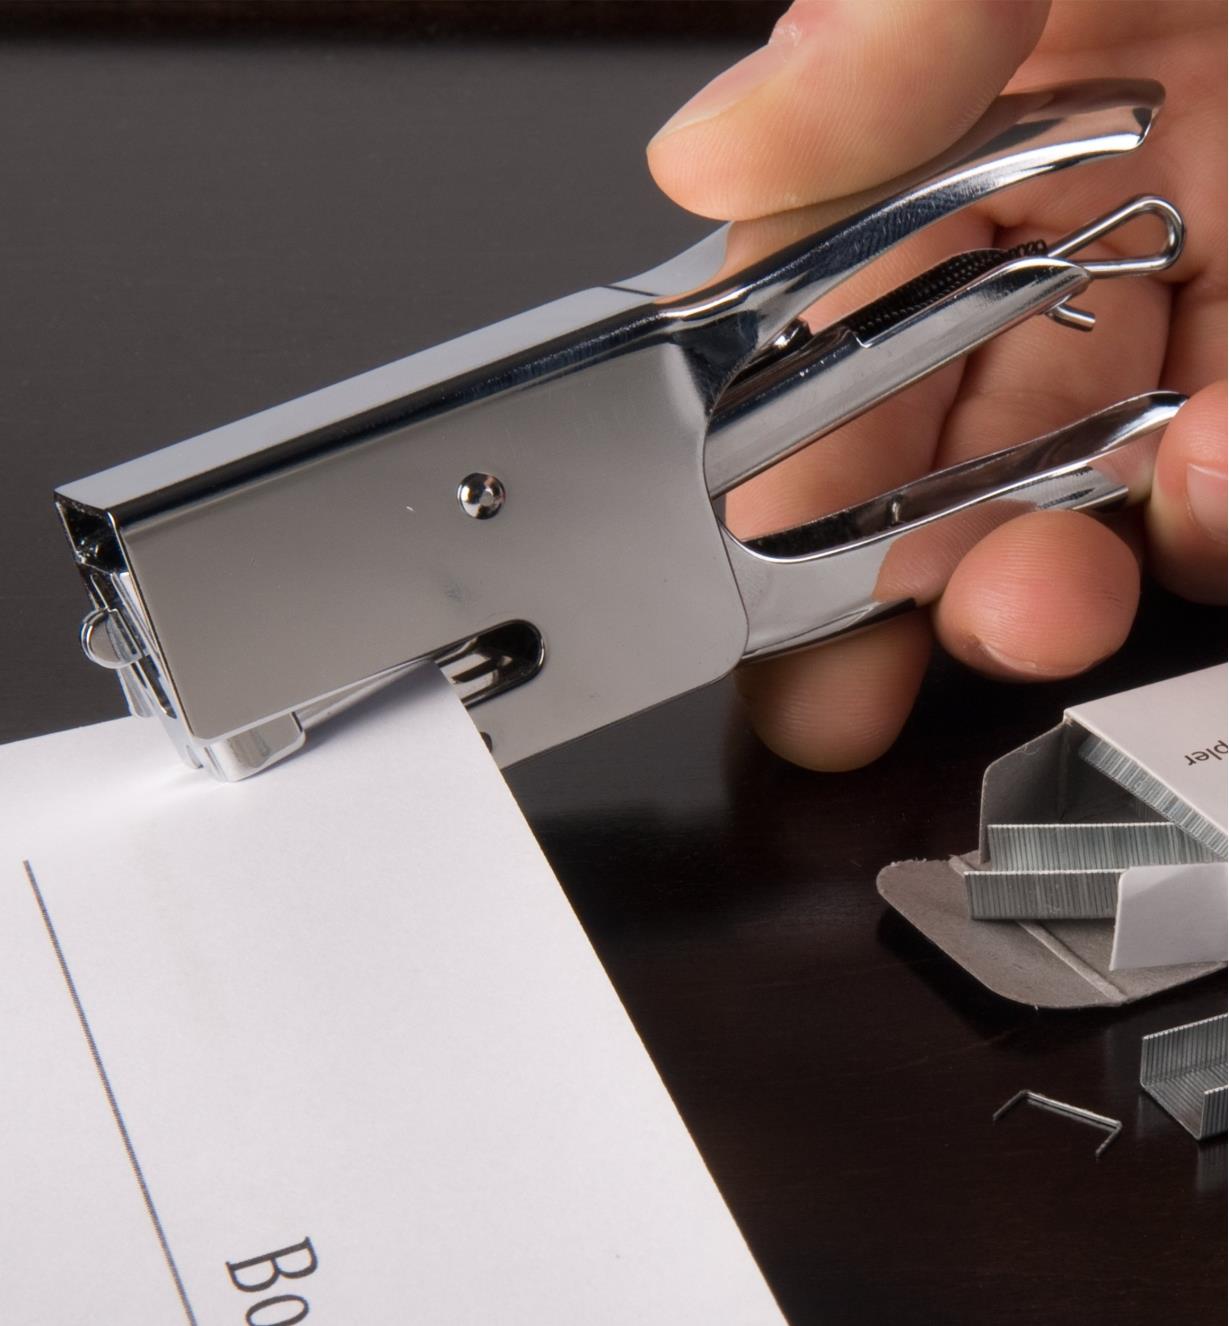 Stapling pages together with a Mini Plier Stapler